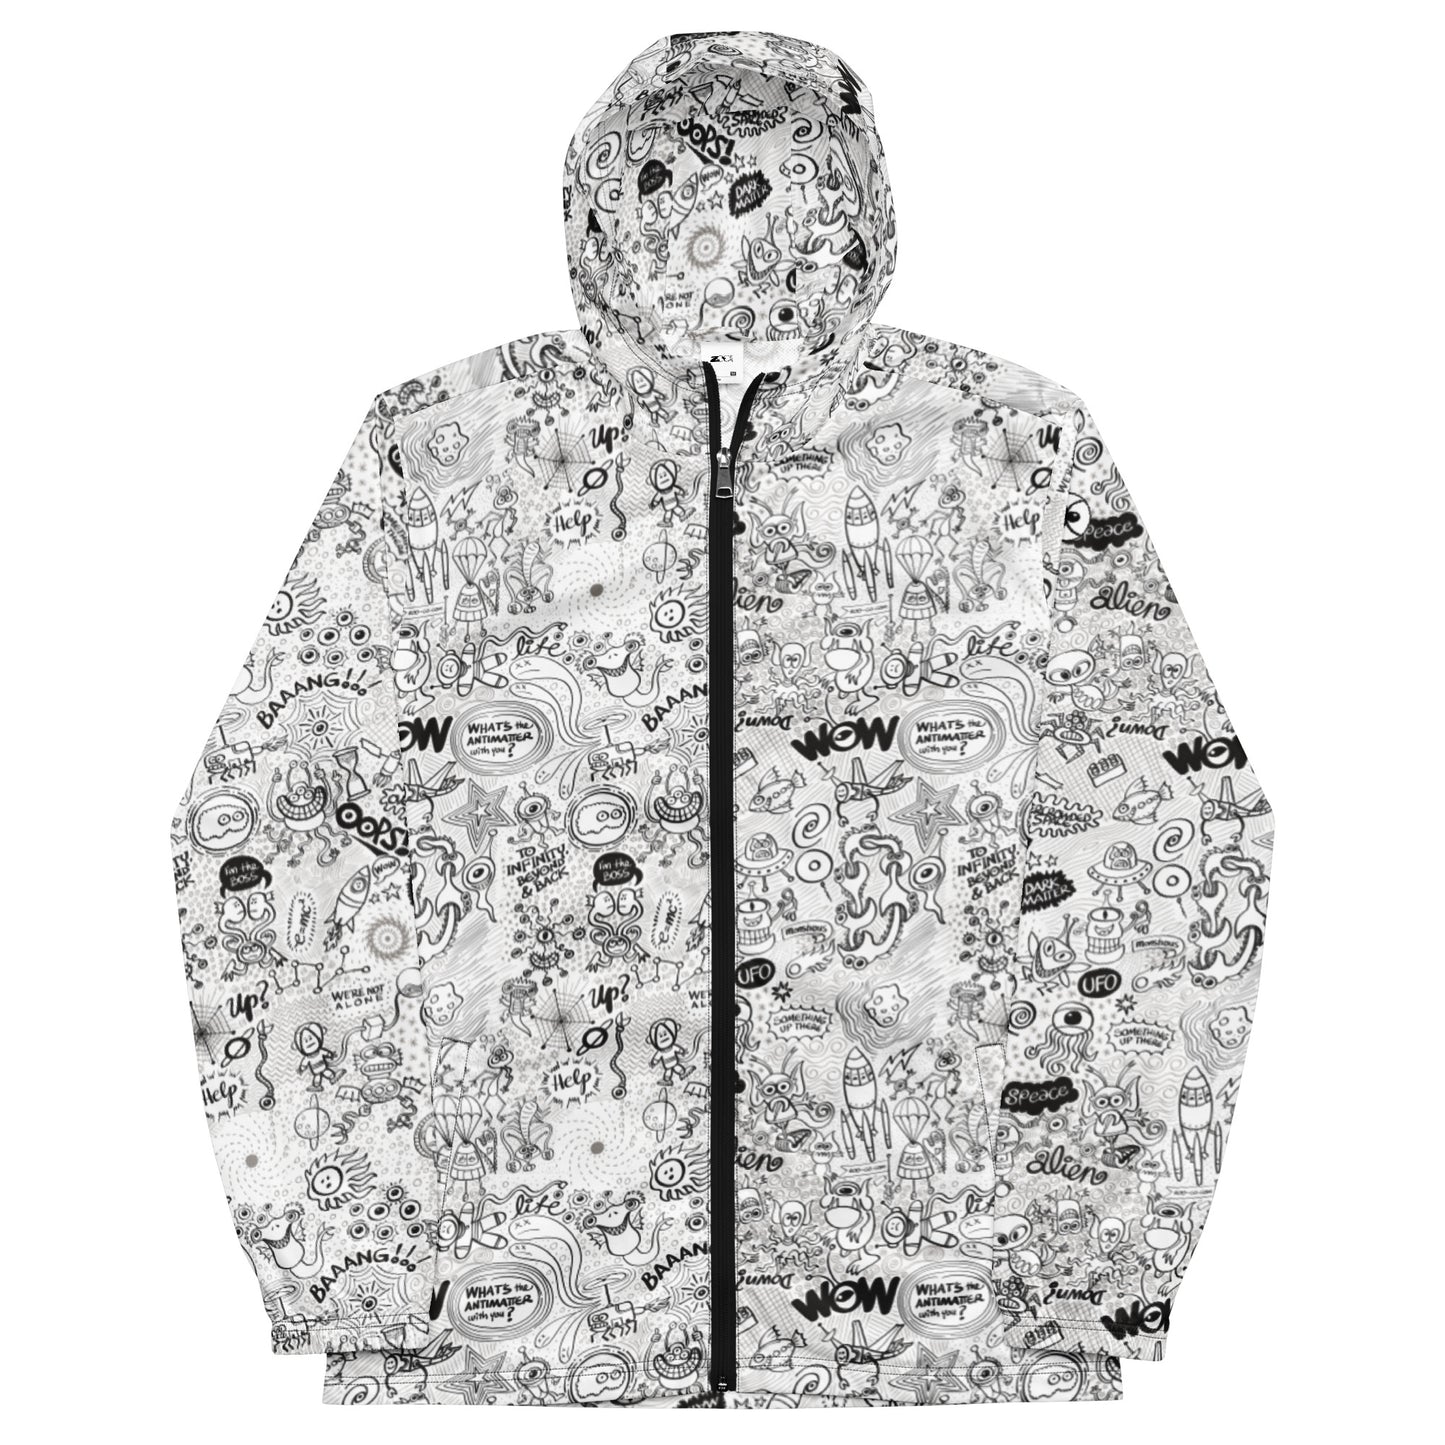 Celebrating the most comprehensive Doodle art of the universe Men’s windbreaker. Front view